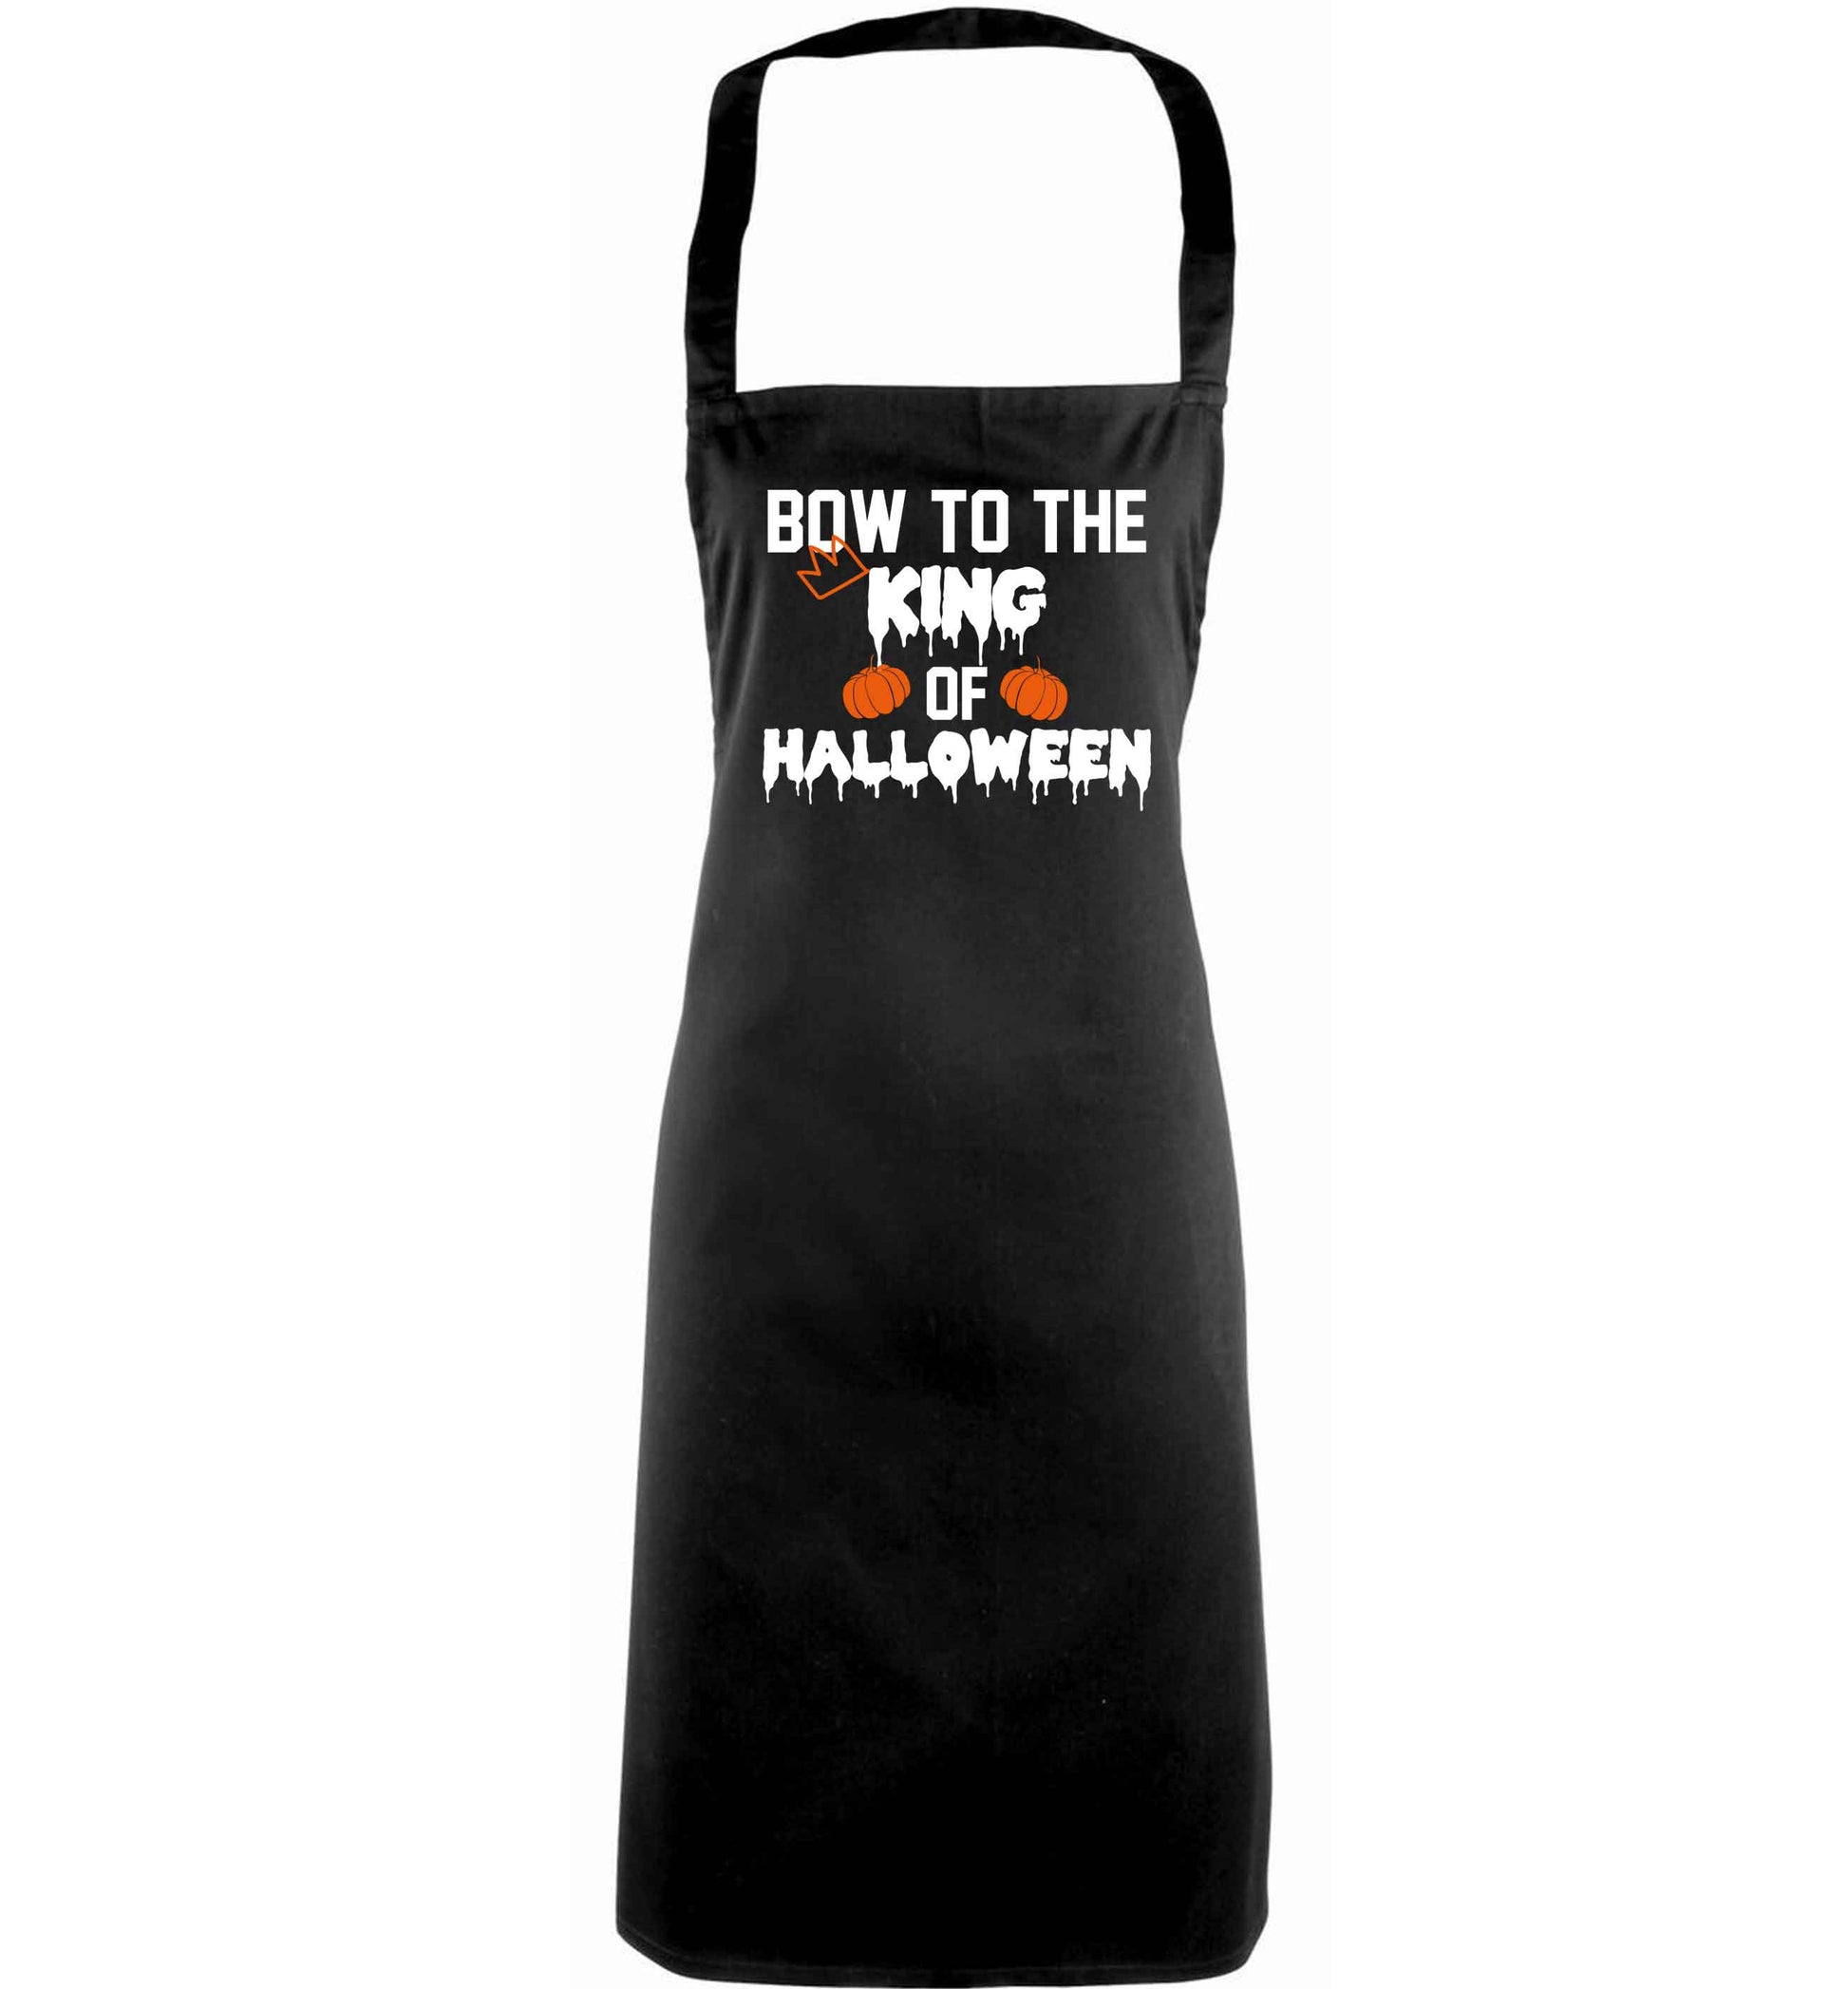 Bow to the King of halloween adults black apron